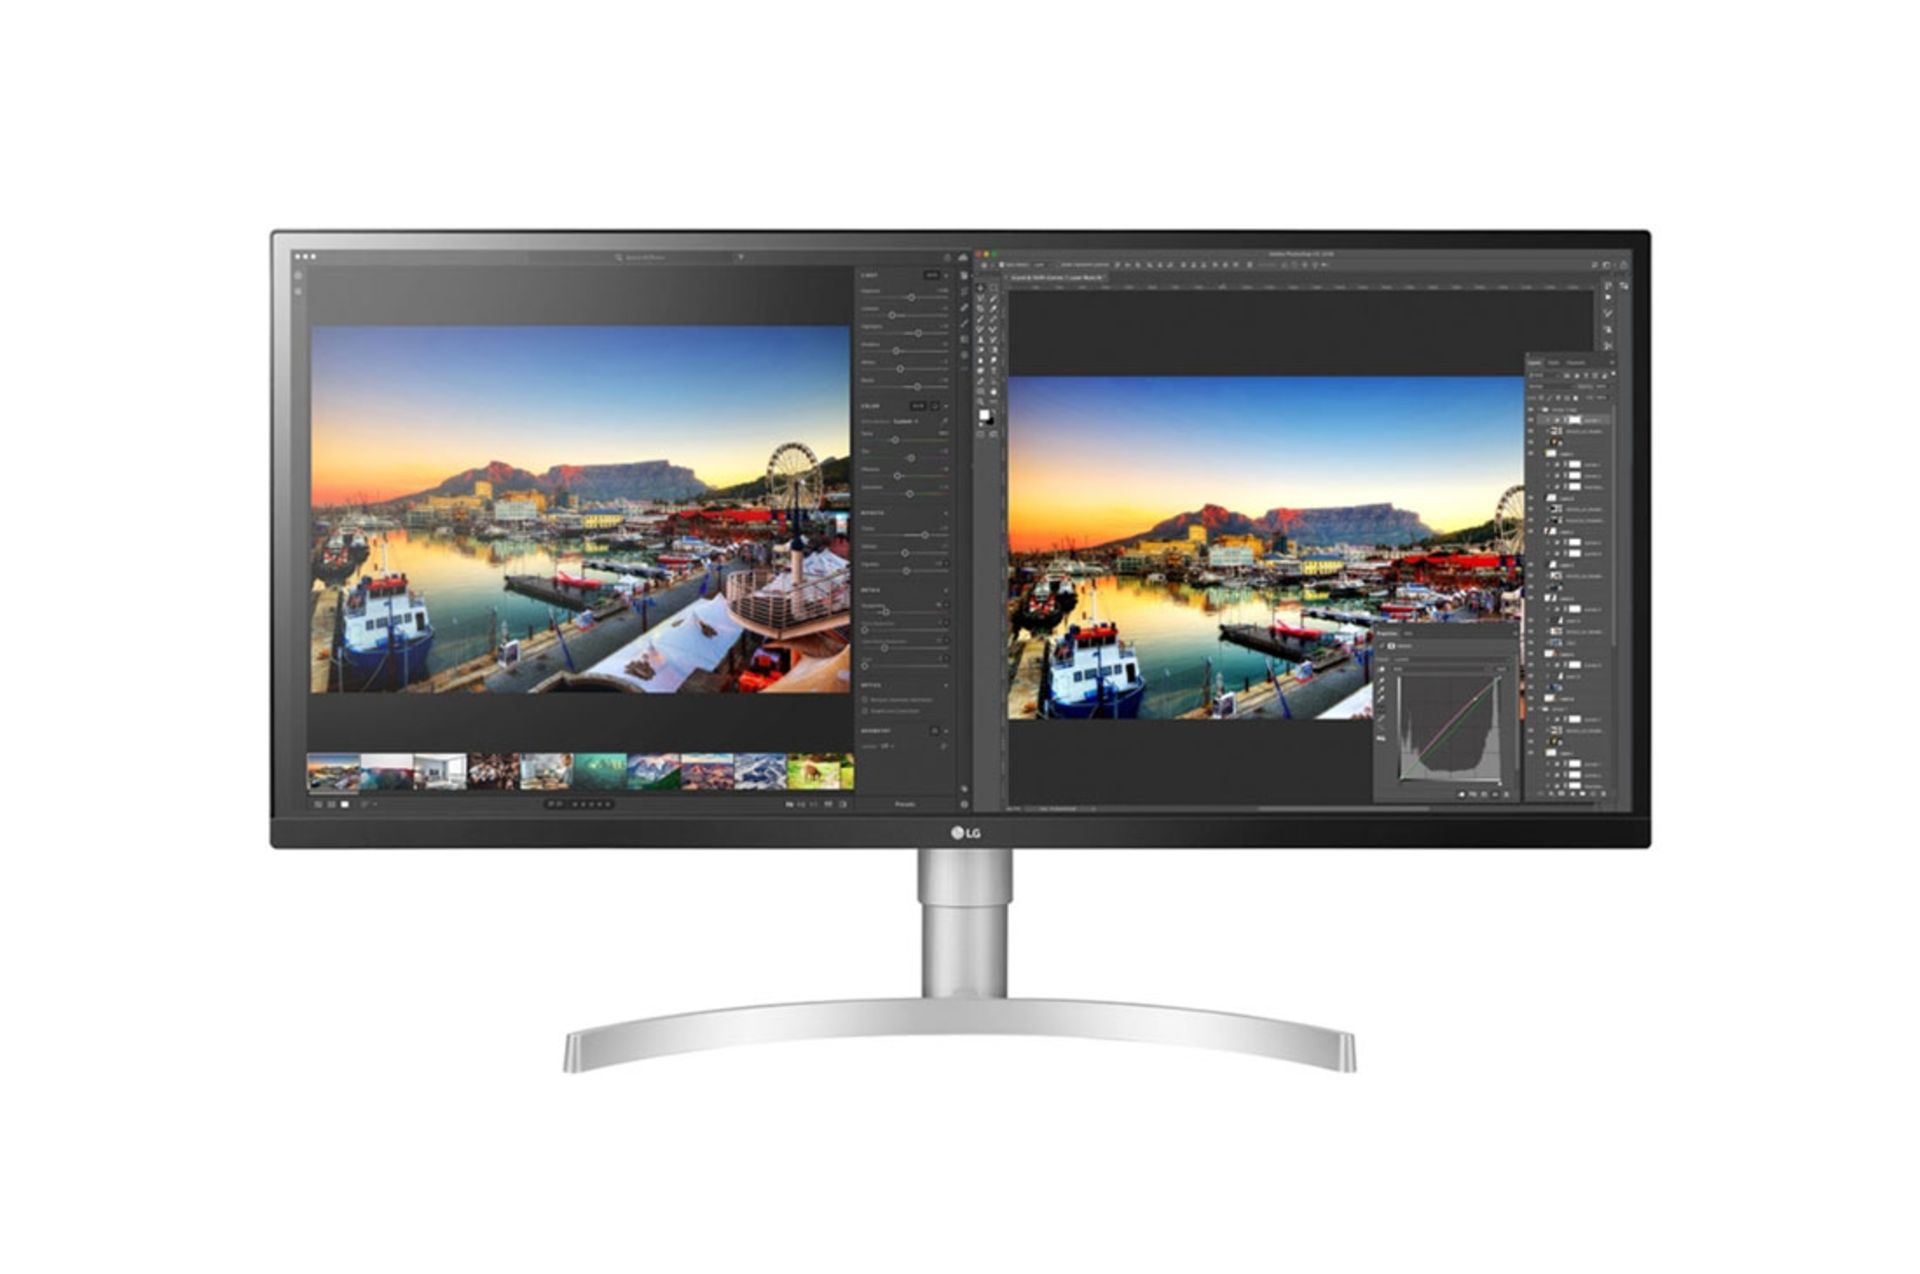 V Grade A LG 34 Inch ULTRA WIDE WQHD IPS LED MONITOR - 3440 X 1440P - BUILT IN SPEAKERS - HDMI X